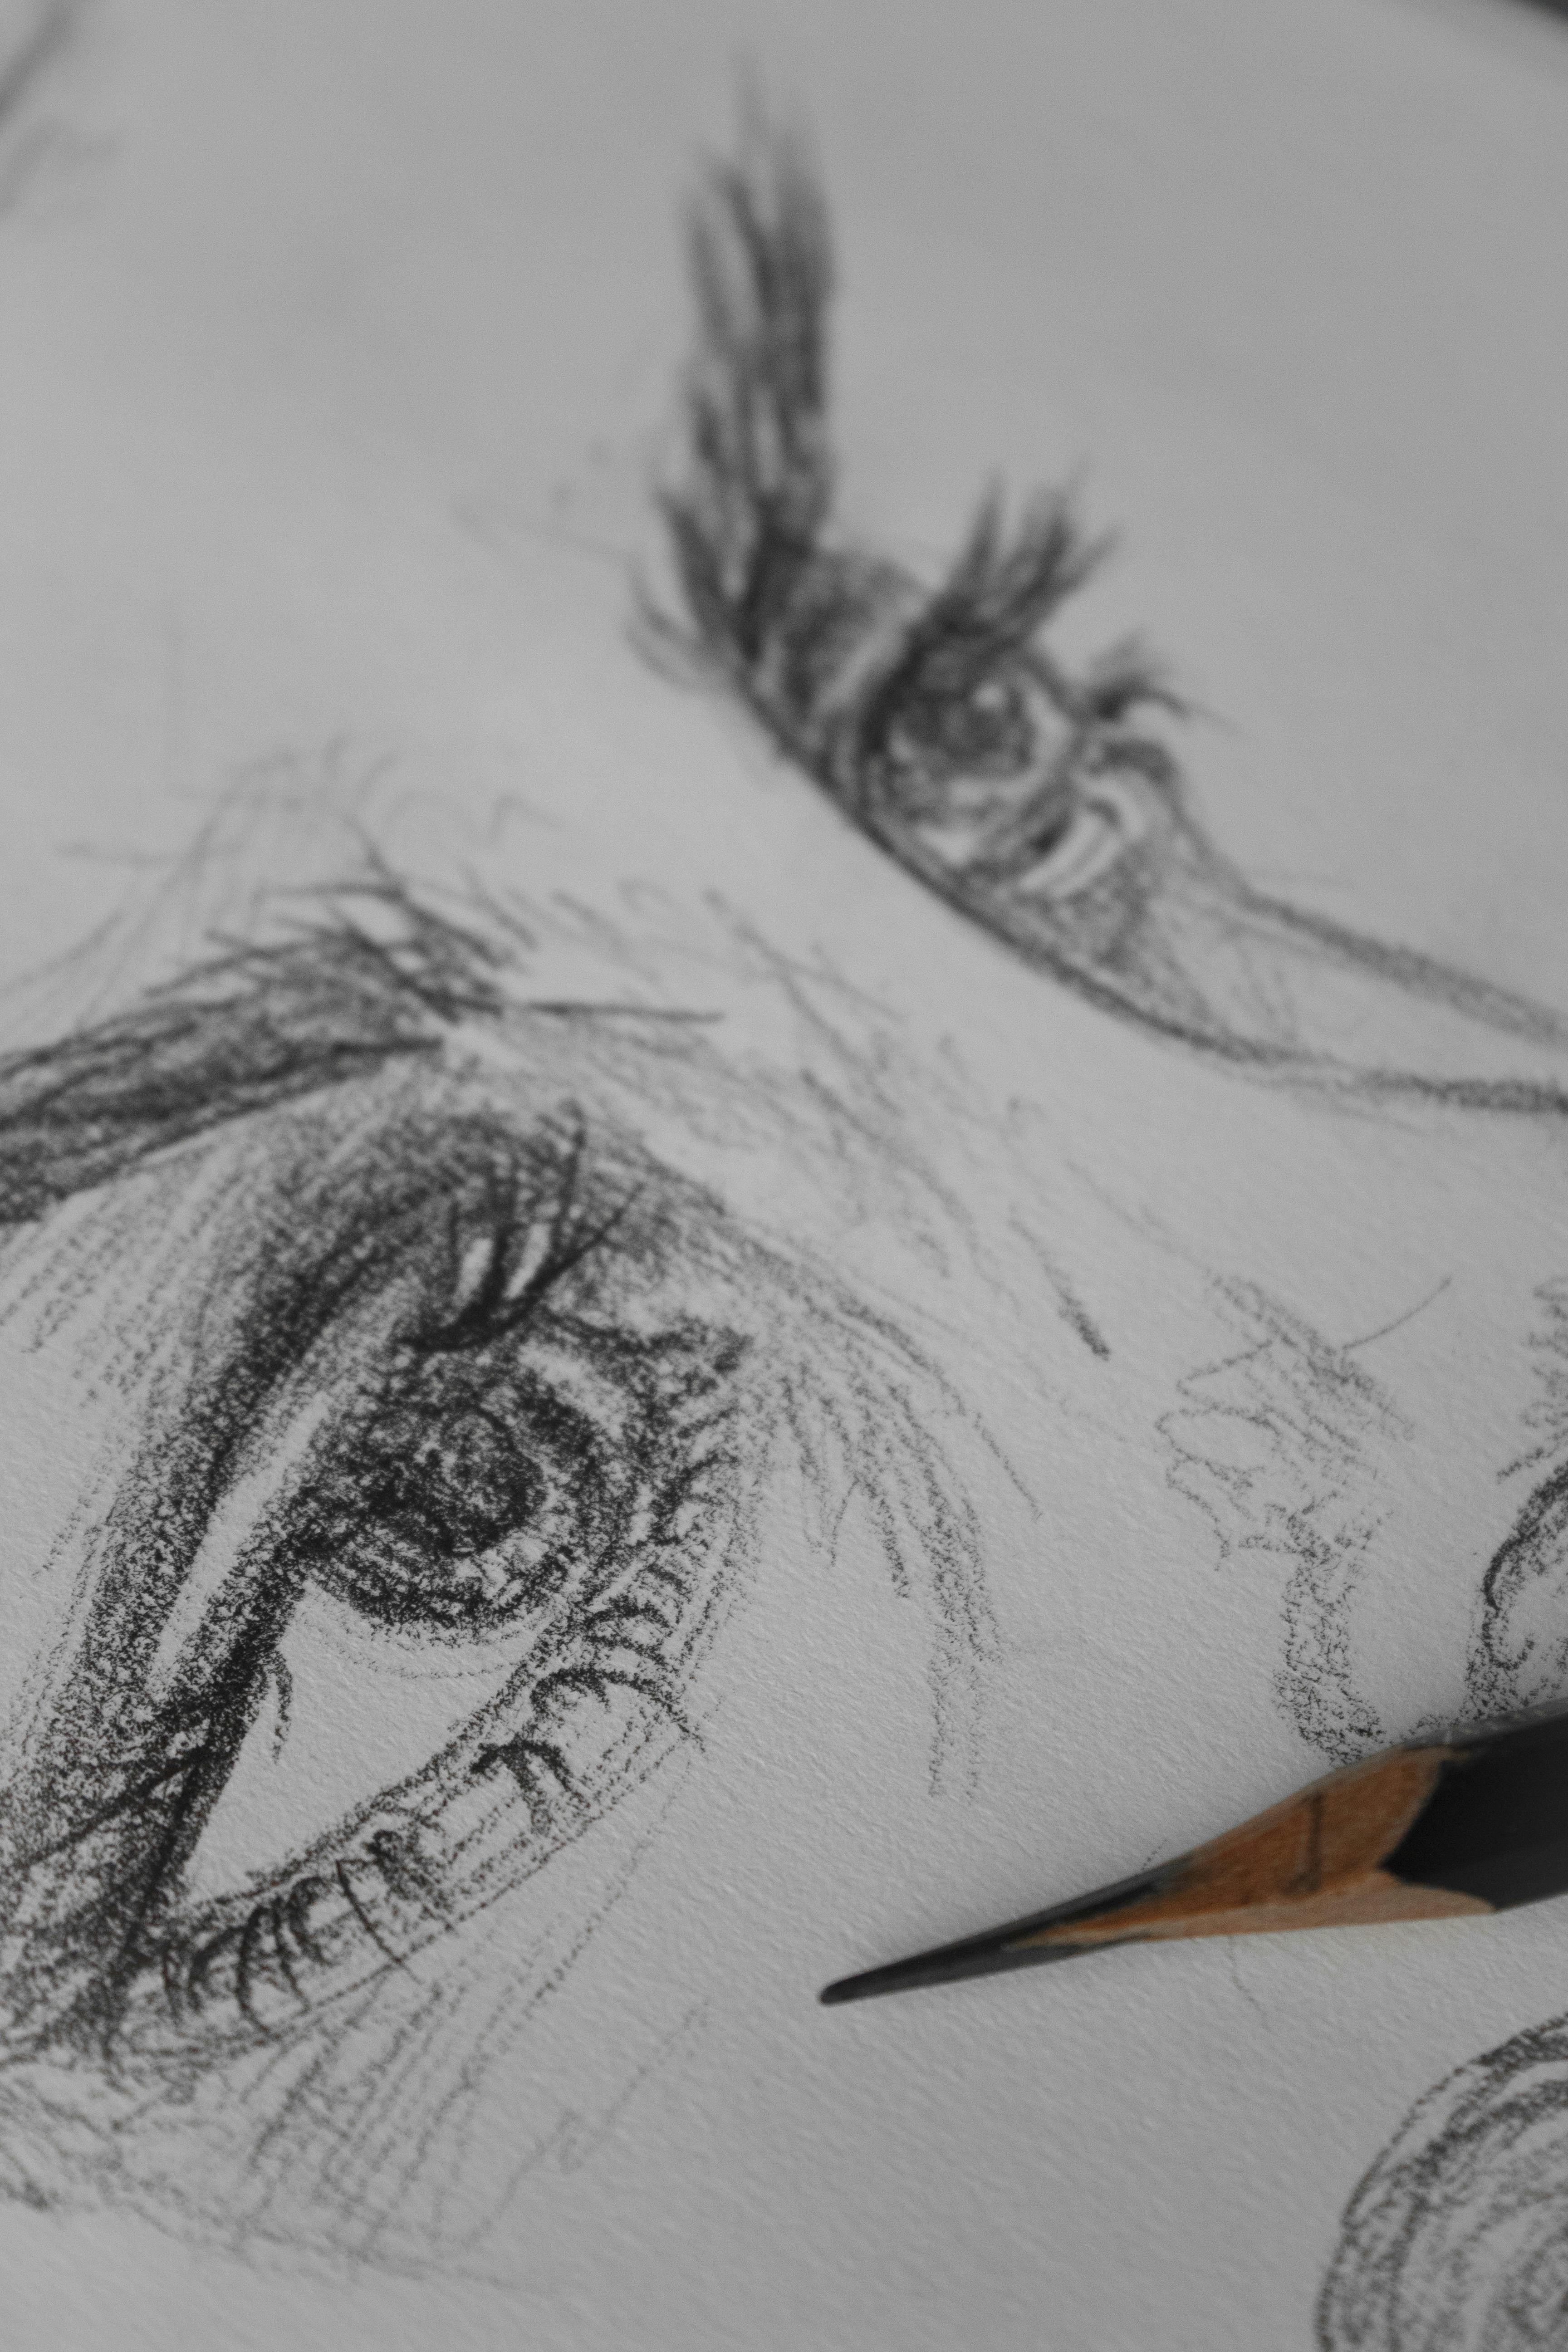 Online Course: Drawing Expressive Eyes for Beginners from Skillshare |  Class Central